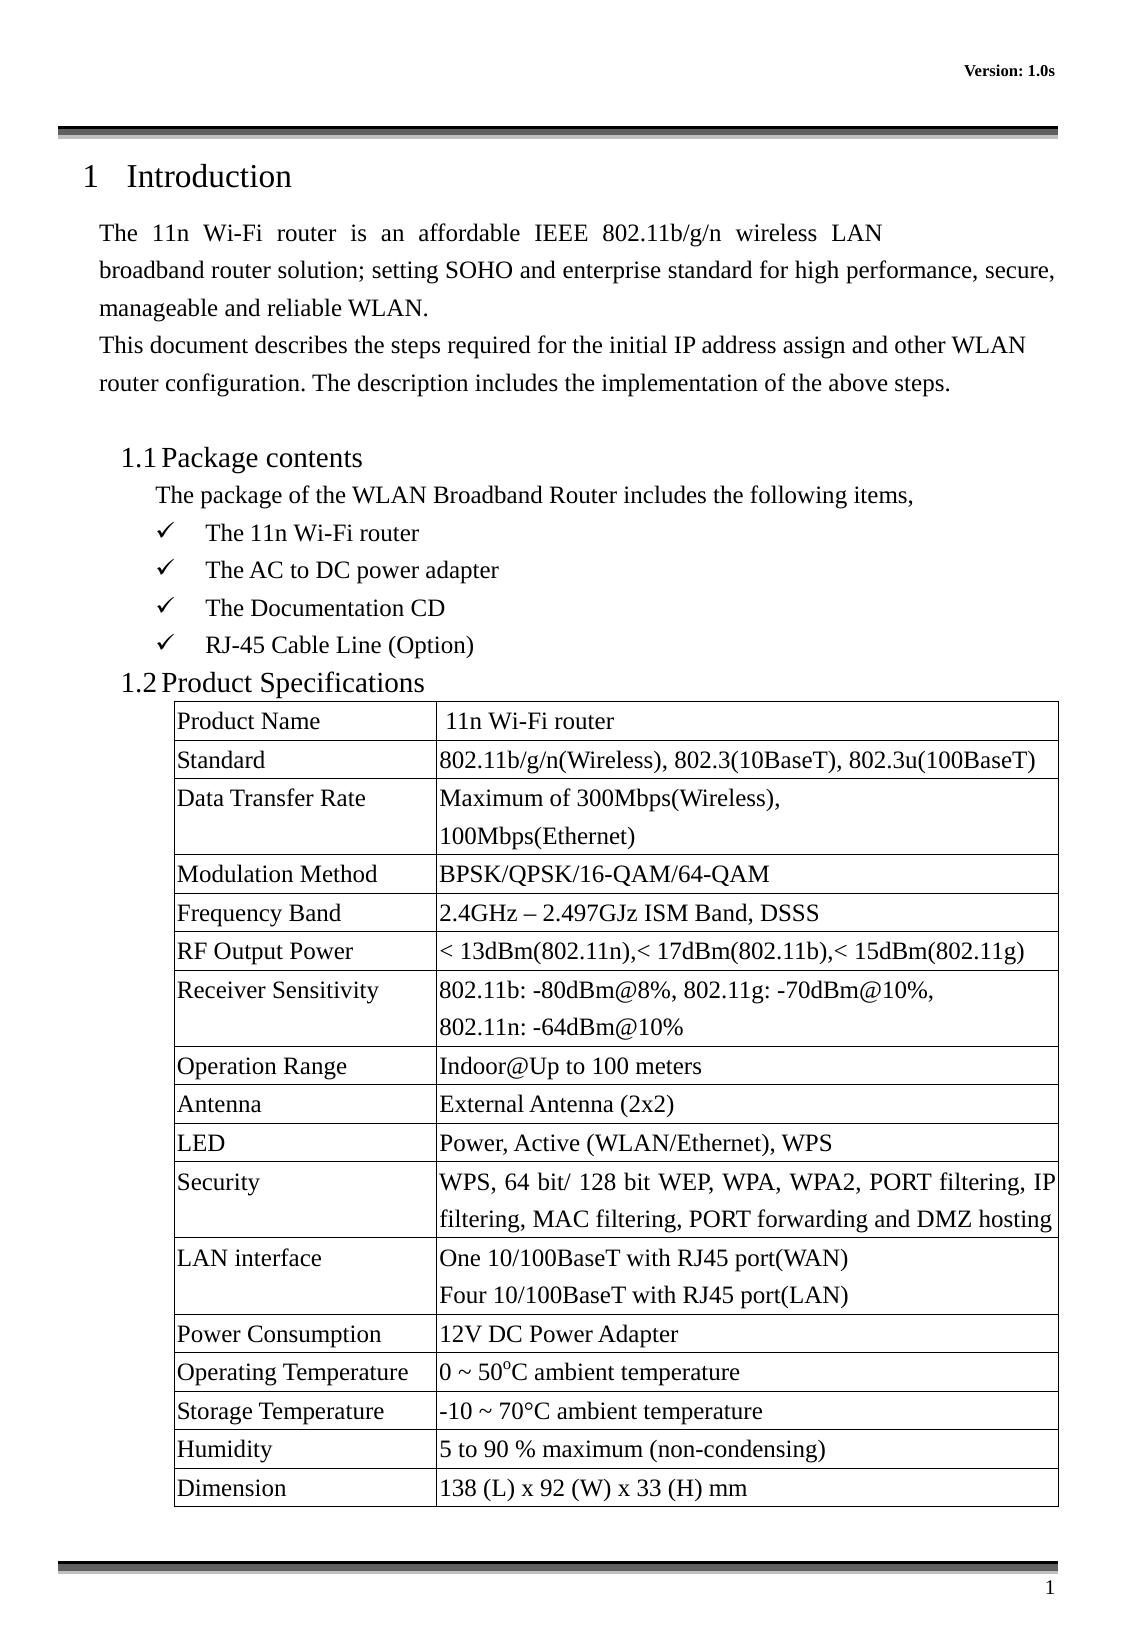      Version: 1.0s      1 1  Introduction The 11n Wi-Fi router is an affordable IEEE 802.11b/g/n wireless LAN broadband router solution; setting SOHO and enterprise standard for high performance, secure, manageable and reliable WLAN. This document describes the steps required for the initial IP address assign and other WLAN router configuration. The description includes the implementation of the above steps.  1.1 Package contents The package of the WLAN Broadband Router includes the following items,   The 11n Wi-Fi router   The AC to DC power adapter   The Documentation CD   RJ-45 Cable Line (Option) 1.2 Product Specifications Product Name                    11n Wi-Fi router  Standard  802.11b/g/n(Wireless), 802.3(10BaseT), 802.3u(100BaseT) Data Transfer Rate  Maximum of 300Mbps(Wireless), 100Mbps(Ethernet) Modulation Method  BPSK/QPSK/16-QAM/64-QAM Frequency Band  2.4GHz – 2.497GJz ISM Band, DSSS RF Output Power  &lt; 13dBm(802.11n),&lt; 17dBm(802.11b),&lt; 15dBm(802.11g) Receiver Sensitivity  802.11b: -80dBm@8%, 802.11g: -70dBm@10%, 802.11n: -64dBm@10% Operation Range  Indoor@Up to 100 meters Antenna External Antenna (2x2) LED Power, Active (WLAN/Ethernet), WPS Security  WPS, 64 bit/ 128 bit WEP, WPA, WPA2, PORT filtering, IPfiltering, MAC filtering, PORT forwarding and DMZ hostingLAN interface  One 10/100BaseT with RJ45 port(WAN) Four 10/100BaseT with RJ45 port(LAN) Power Consumption  12V DC Power Adapter Operating Temperature  0 ~ 50oC ambient temperature Storage Temperature  -10 ~ 70°C ambient temperature Humidity  5 to 90 % maximum (non-condensing) Dimension  138 (L) x 92 (W) x 33 (H) mm 